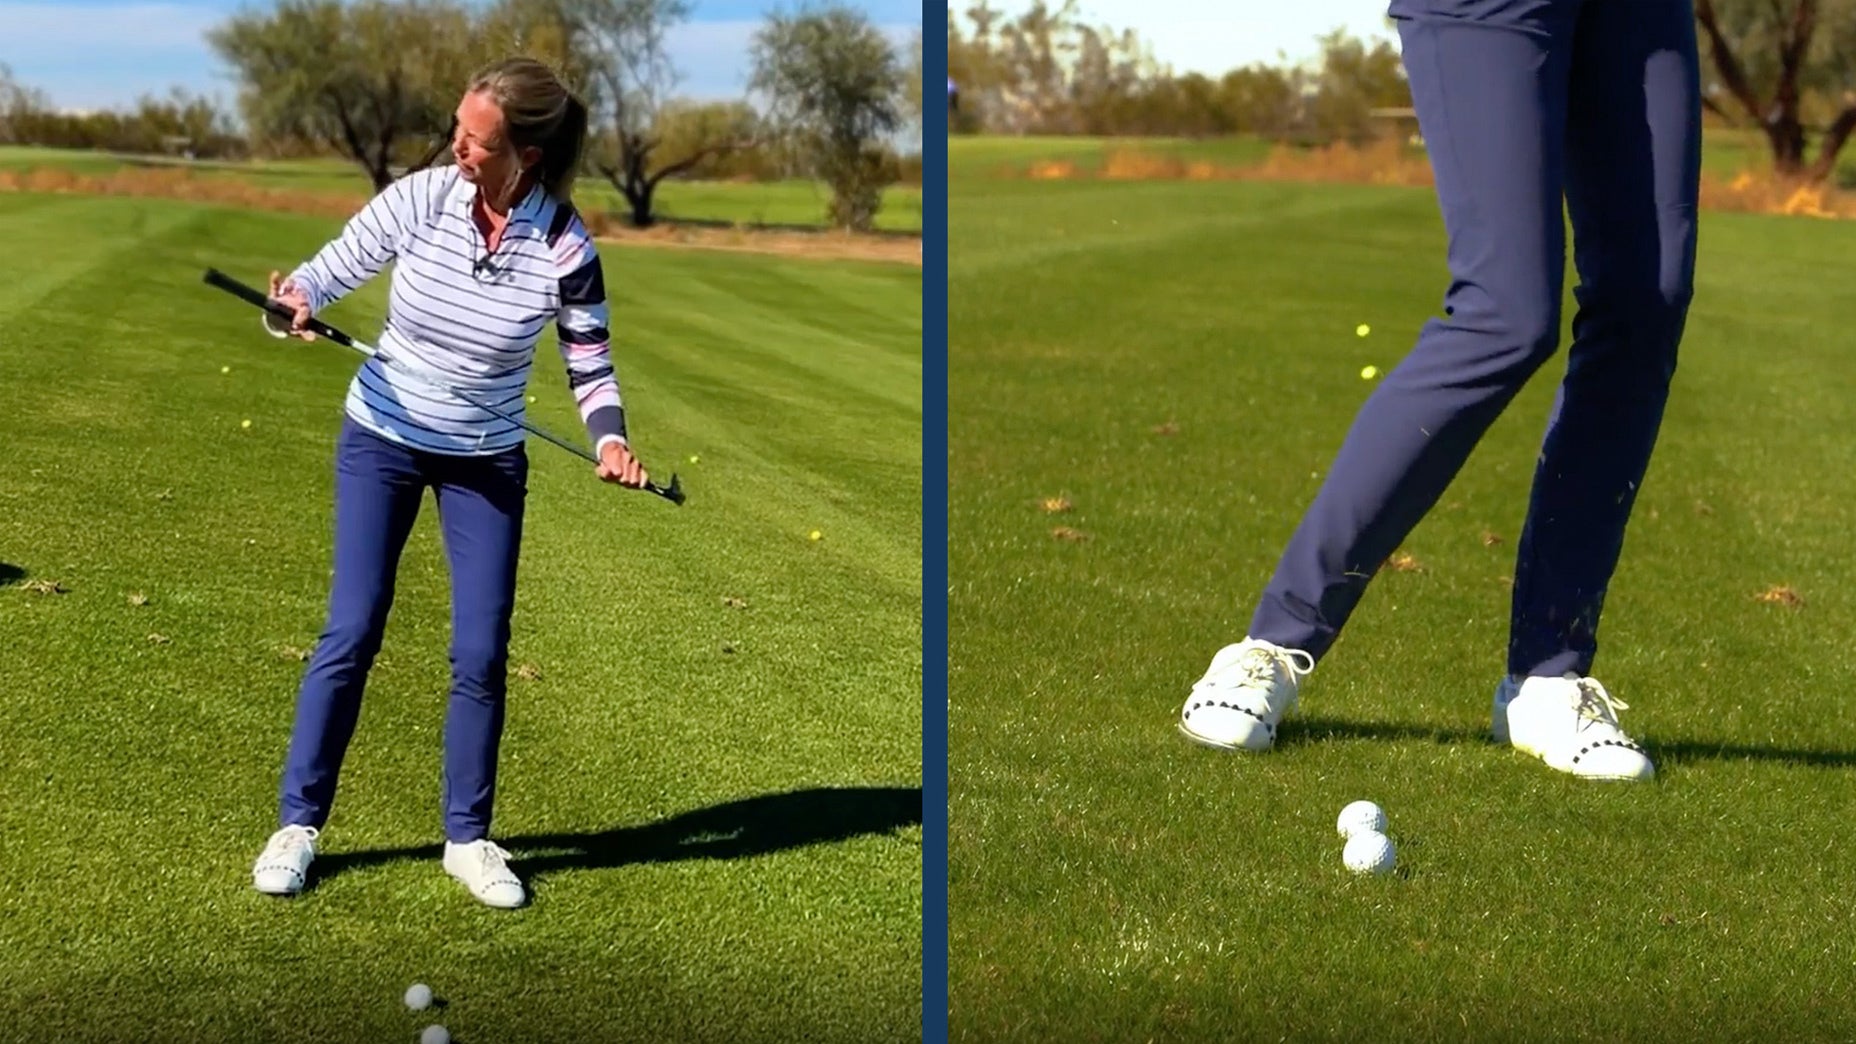 GOLF Top 100 Teacher Carol Presinger demonstrates a practice tip using a downhill lie to improve your iron shots from the fairway